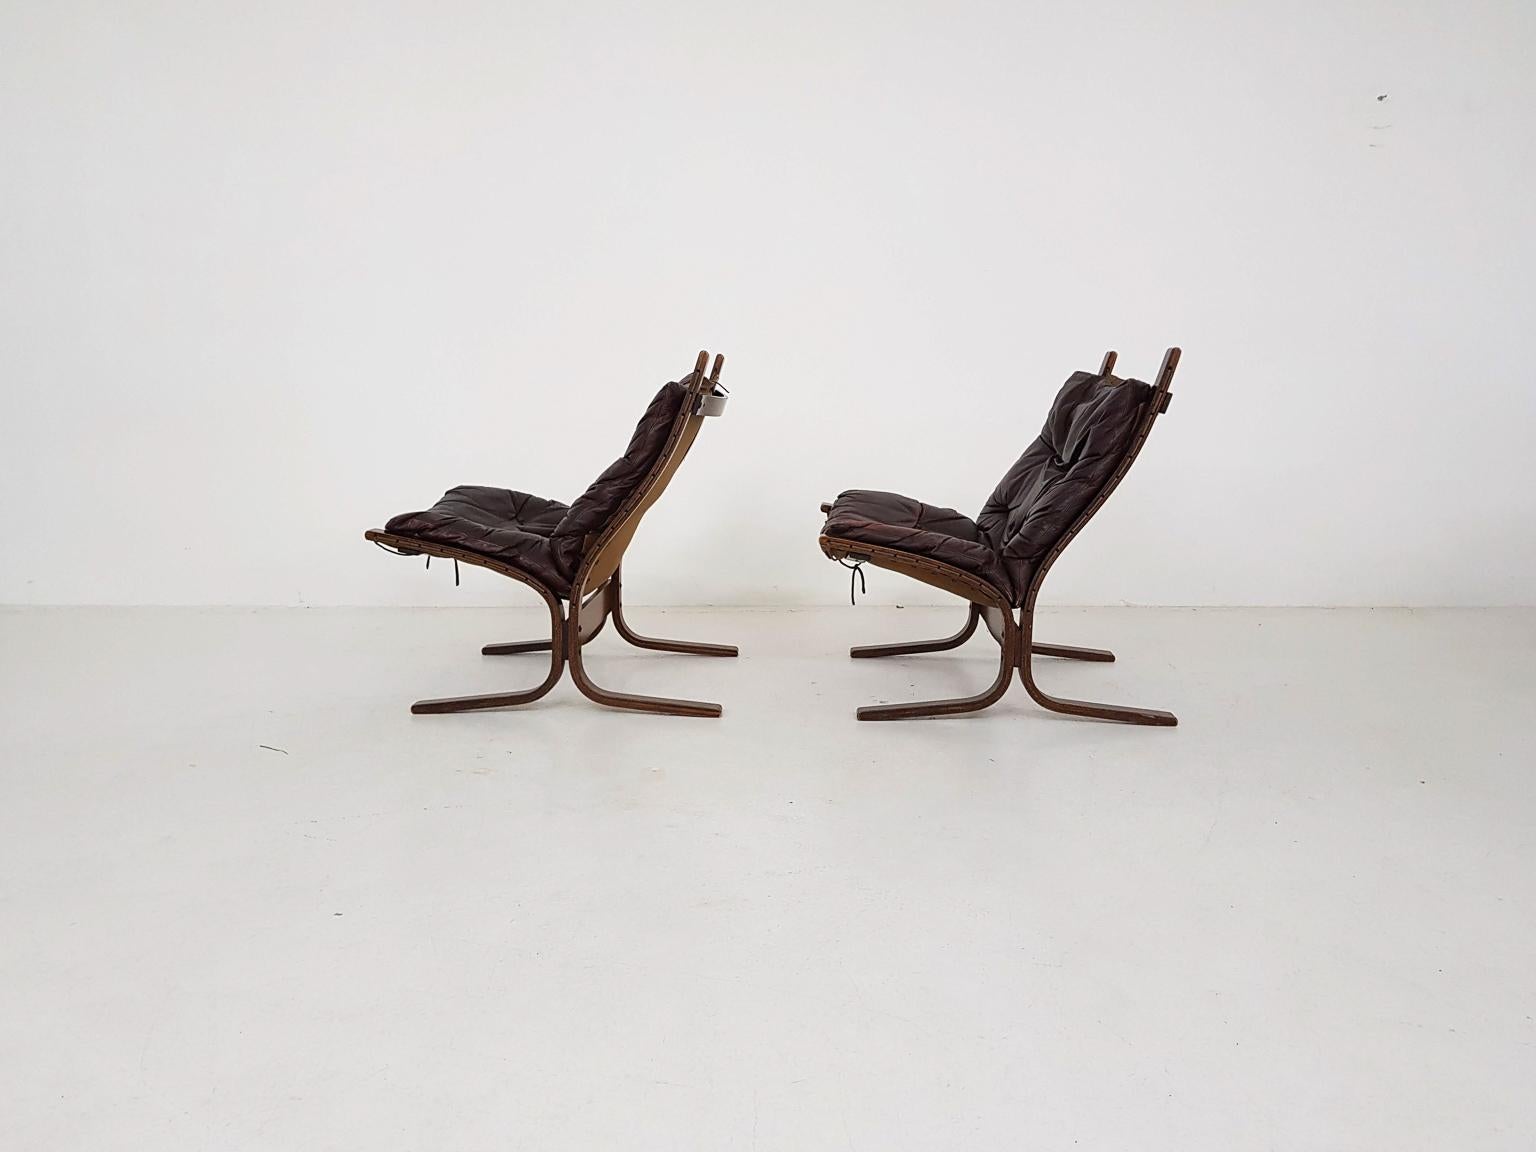 Pair of matching lounge chairs by Norwegian designer Ingmar Relling for Westnofa. Made in Norway in the 1960s.

These vintage chairs are among the best known Norwegian design chairs of the midcentury. The Scandinavian Modern lounge chairs are